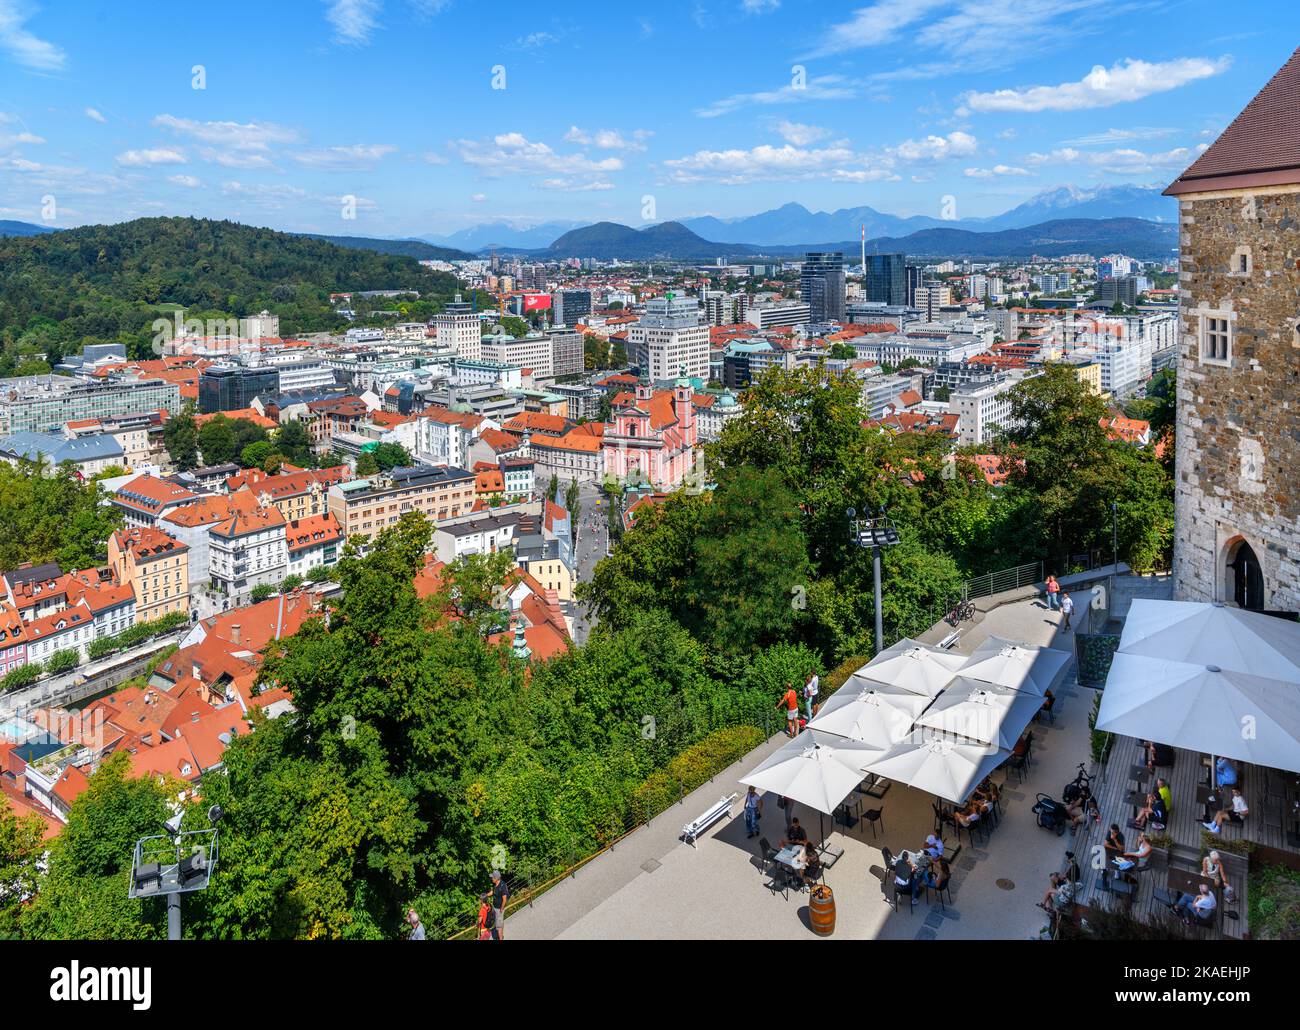 View over the old town from Lubljana Castle, with the cafe terrace in the foreground, Ljubljana, Slovenia Stock Photo